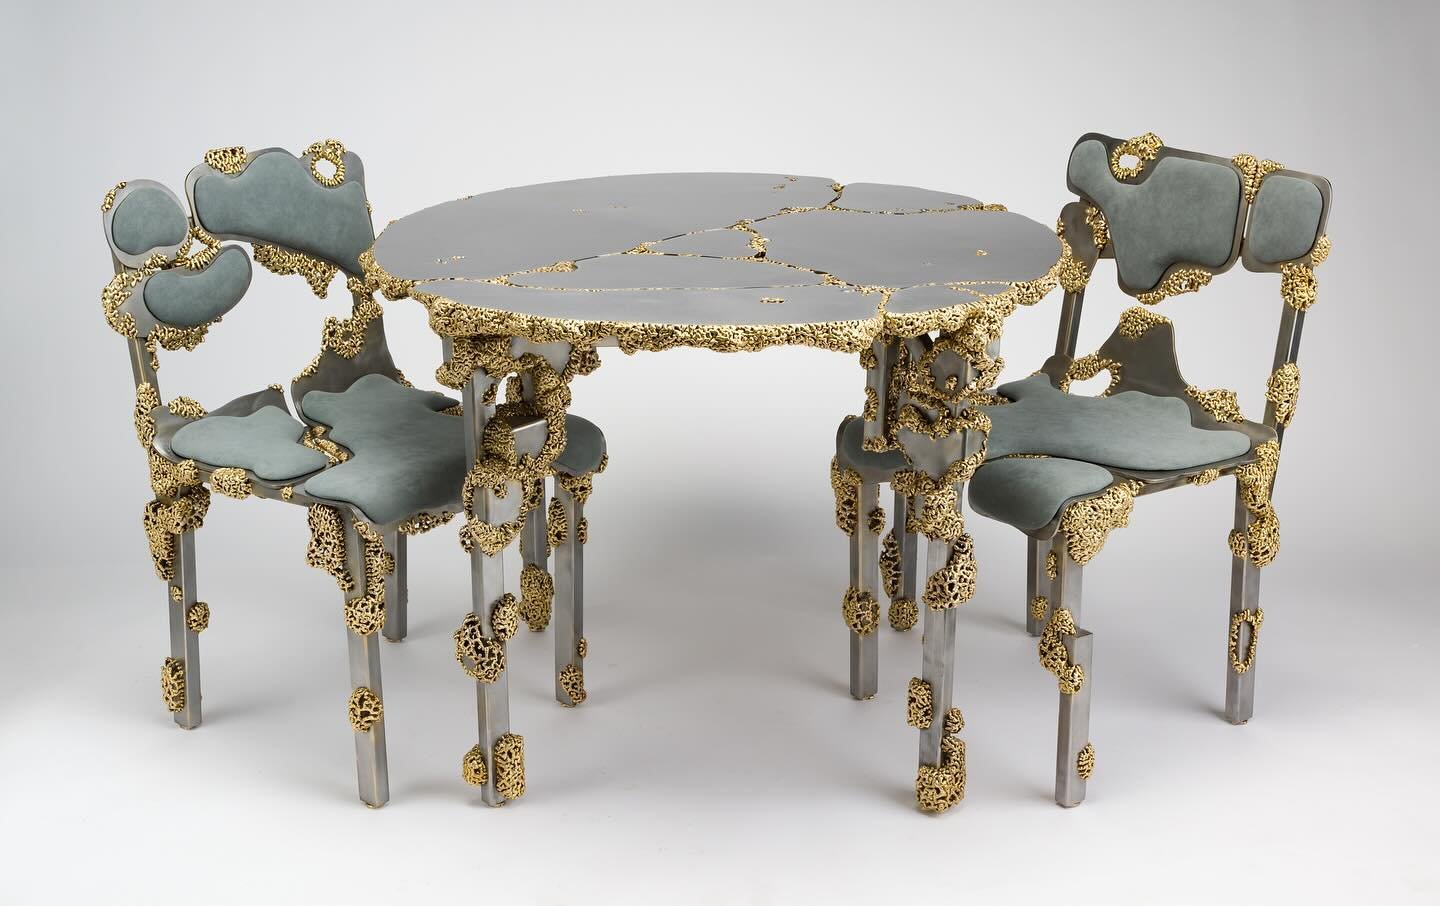 Tectonic Dripped Bronze Table and Chairs @expochicago @davidkleingallery